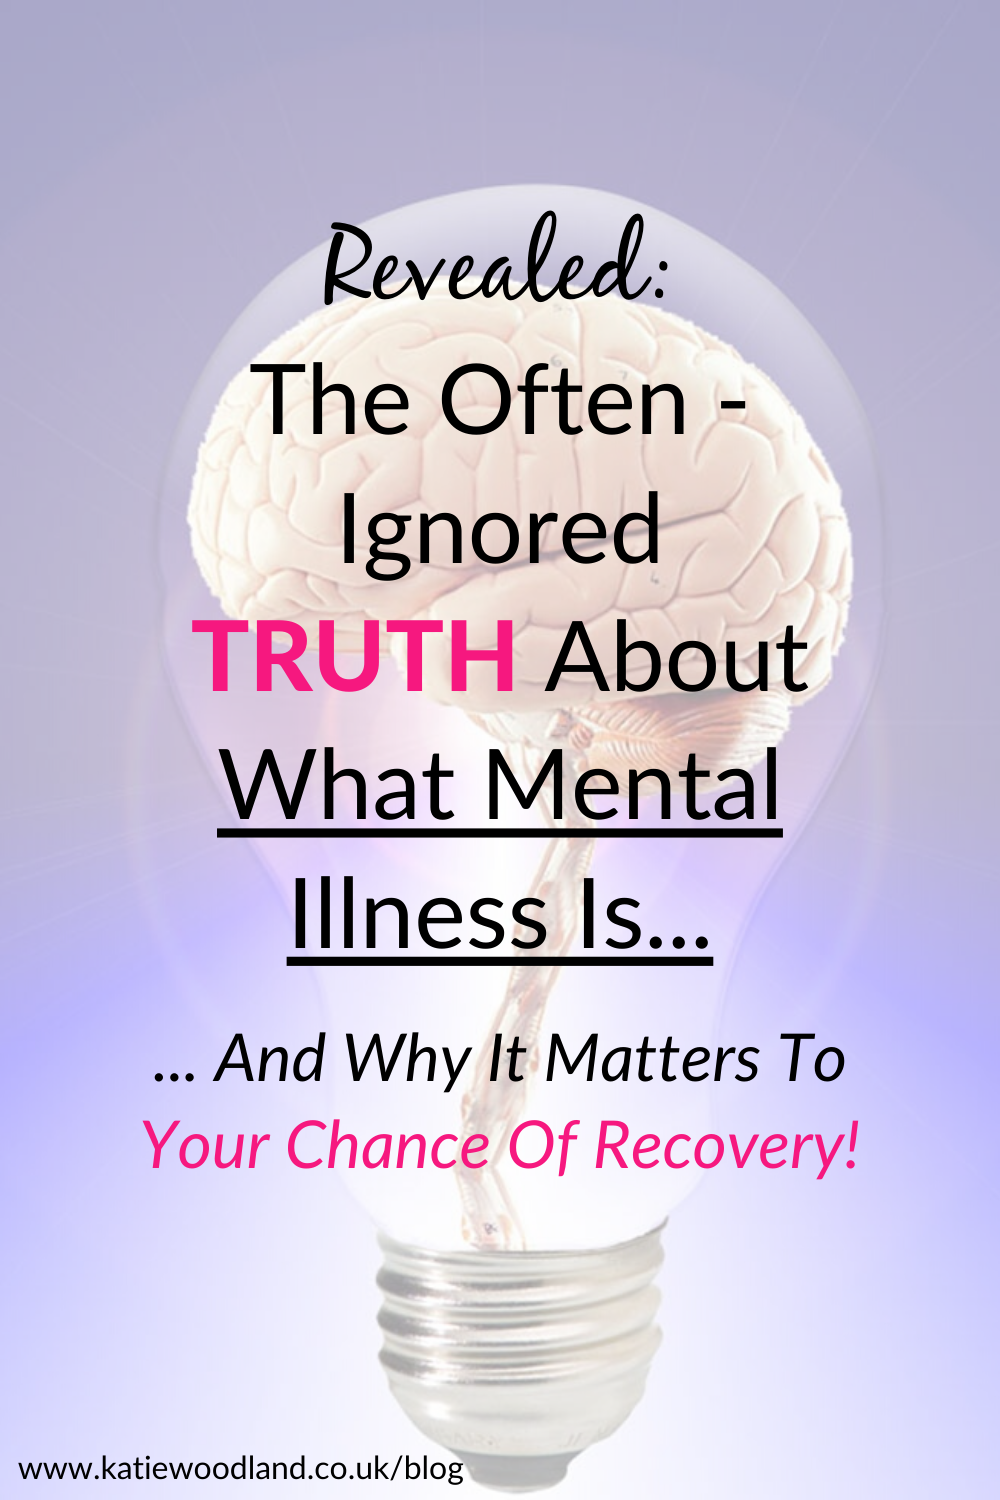 The Often Ignored TRUTH About What Mental Illness Is... And Why It Matters To Your Chance Of Recovery